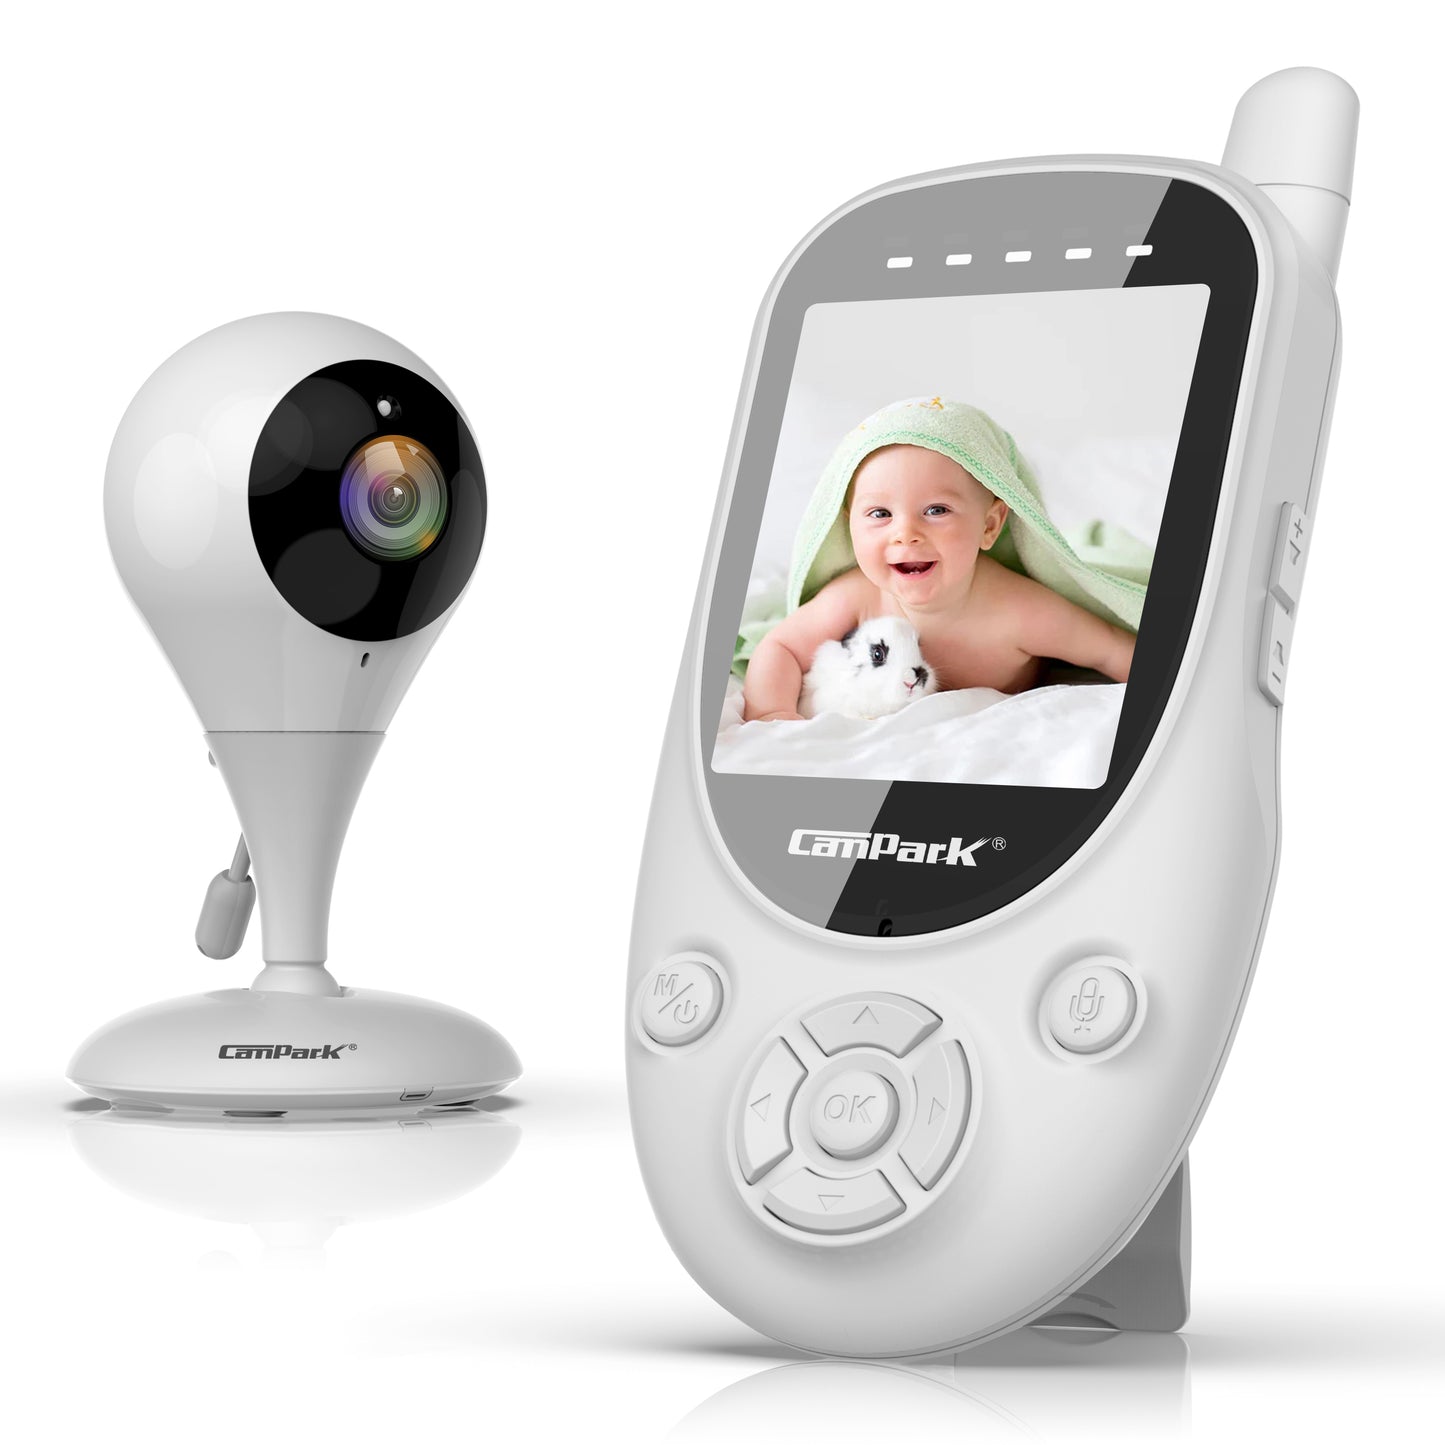 CAMPARK Video Baby Monitor with Cameras, 2.4" LCD Screen,Two-Way Talk, Night Vision, VOX Mode, 8 Lullabies, Temperature Monitor, Long Transmission Range